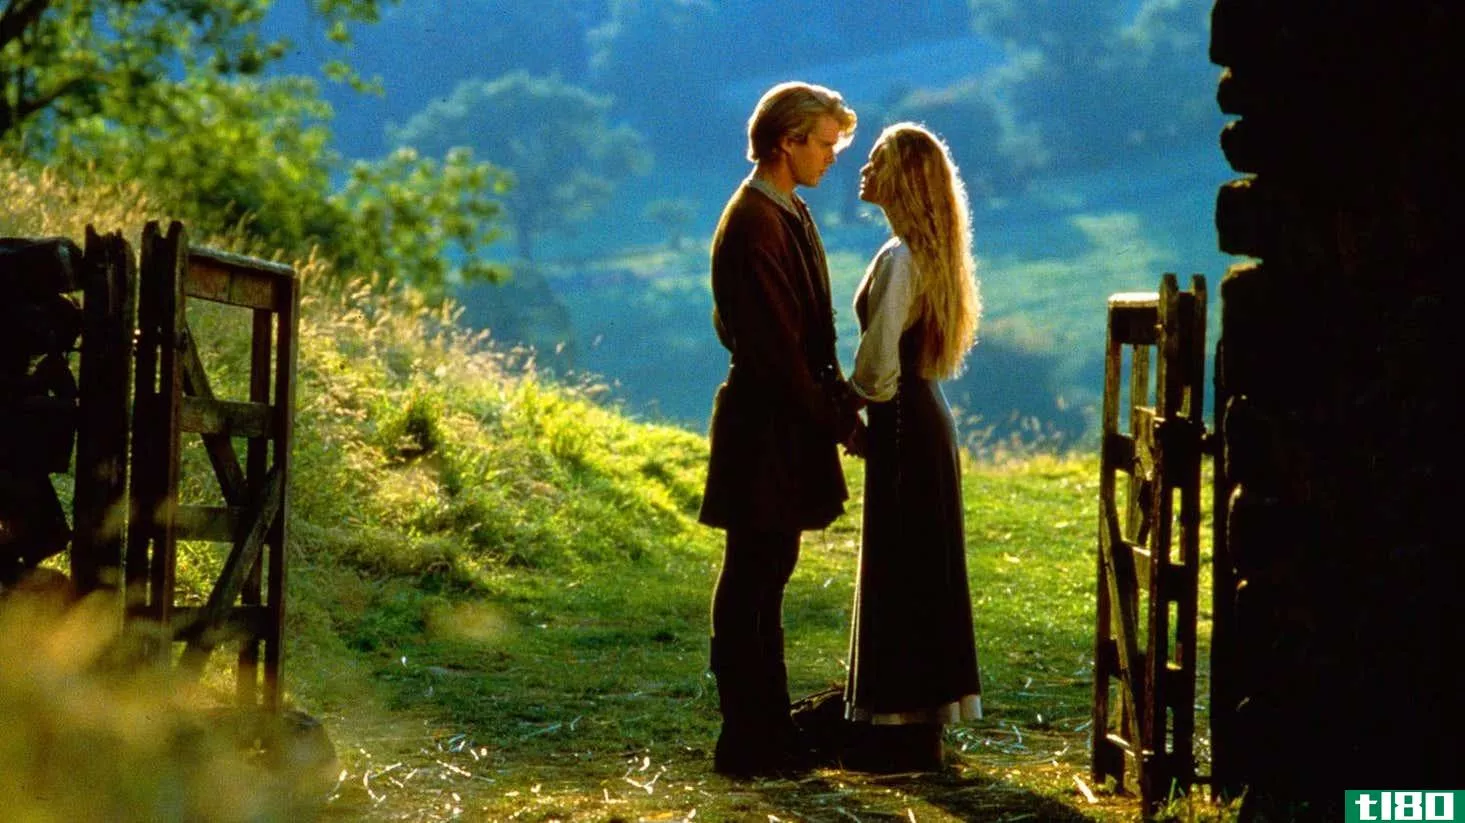 A screenshot from The Princess Bride of Westley and Buttercup embracing